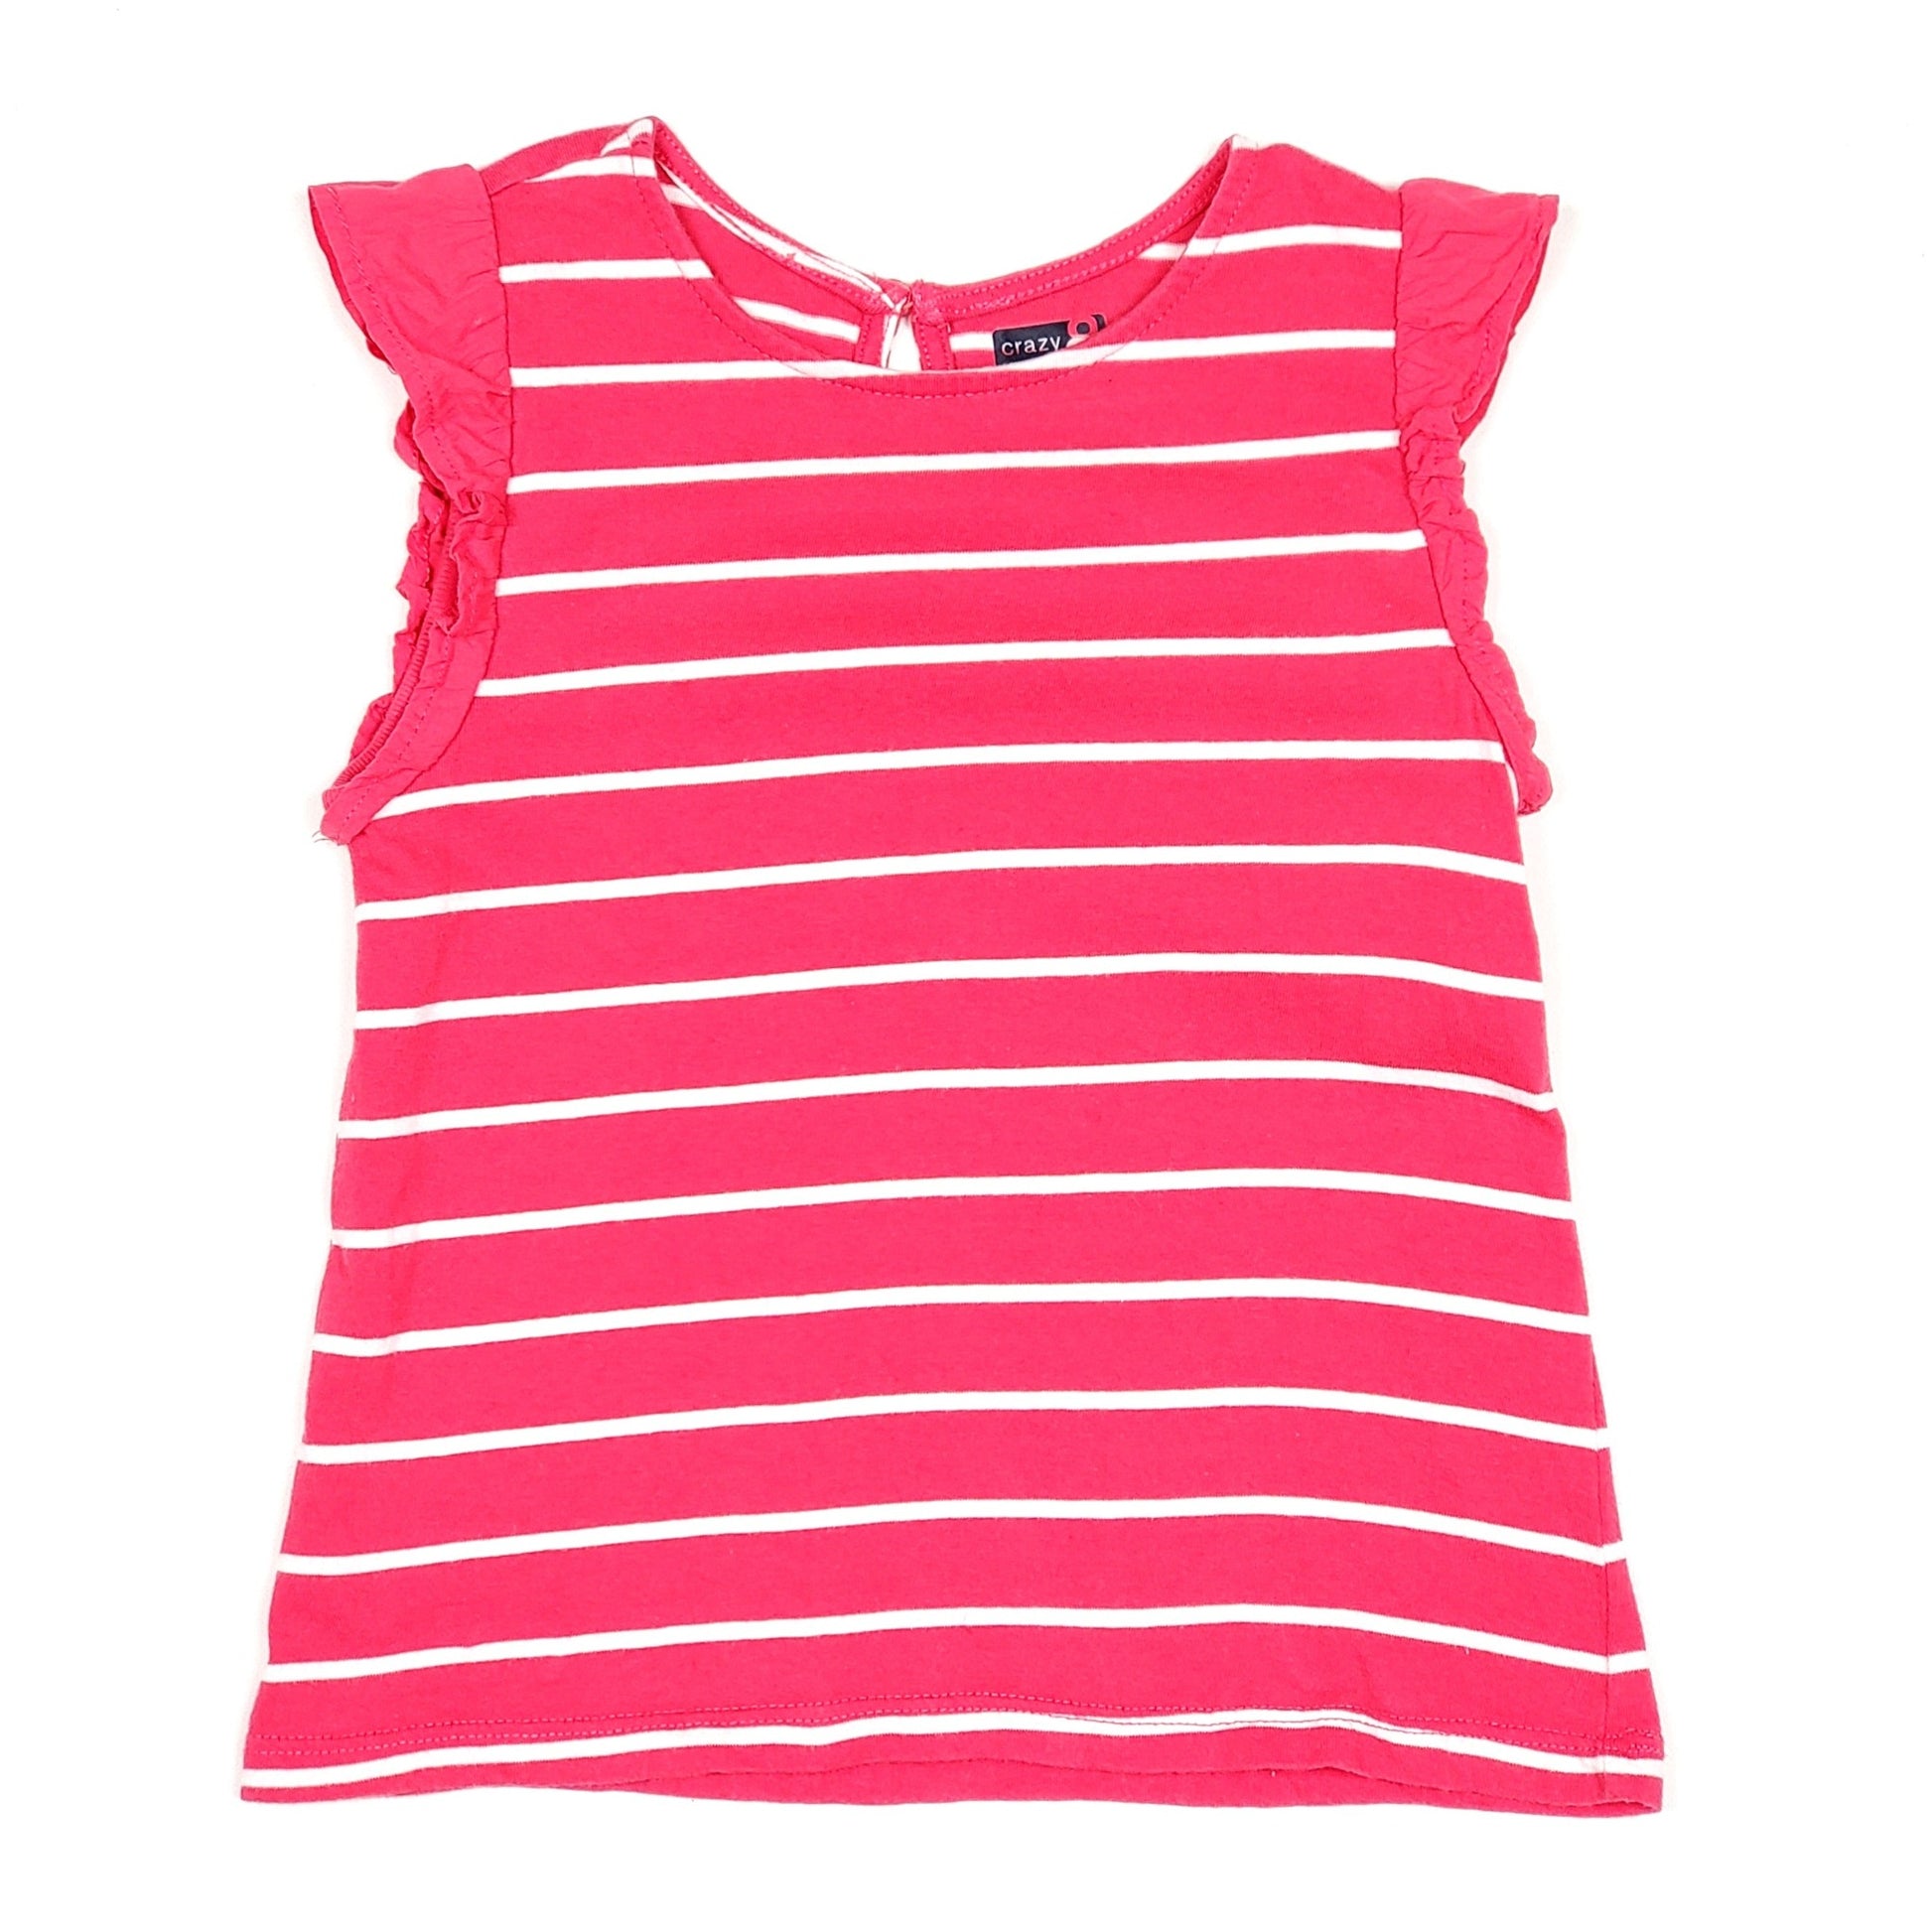 Crazy 8 Girls Pink White Striped Top 3T Used View 1